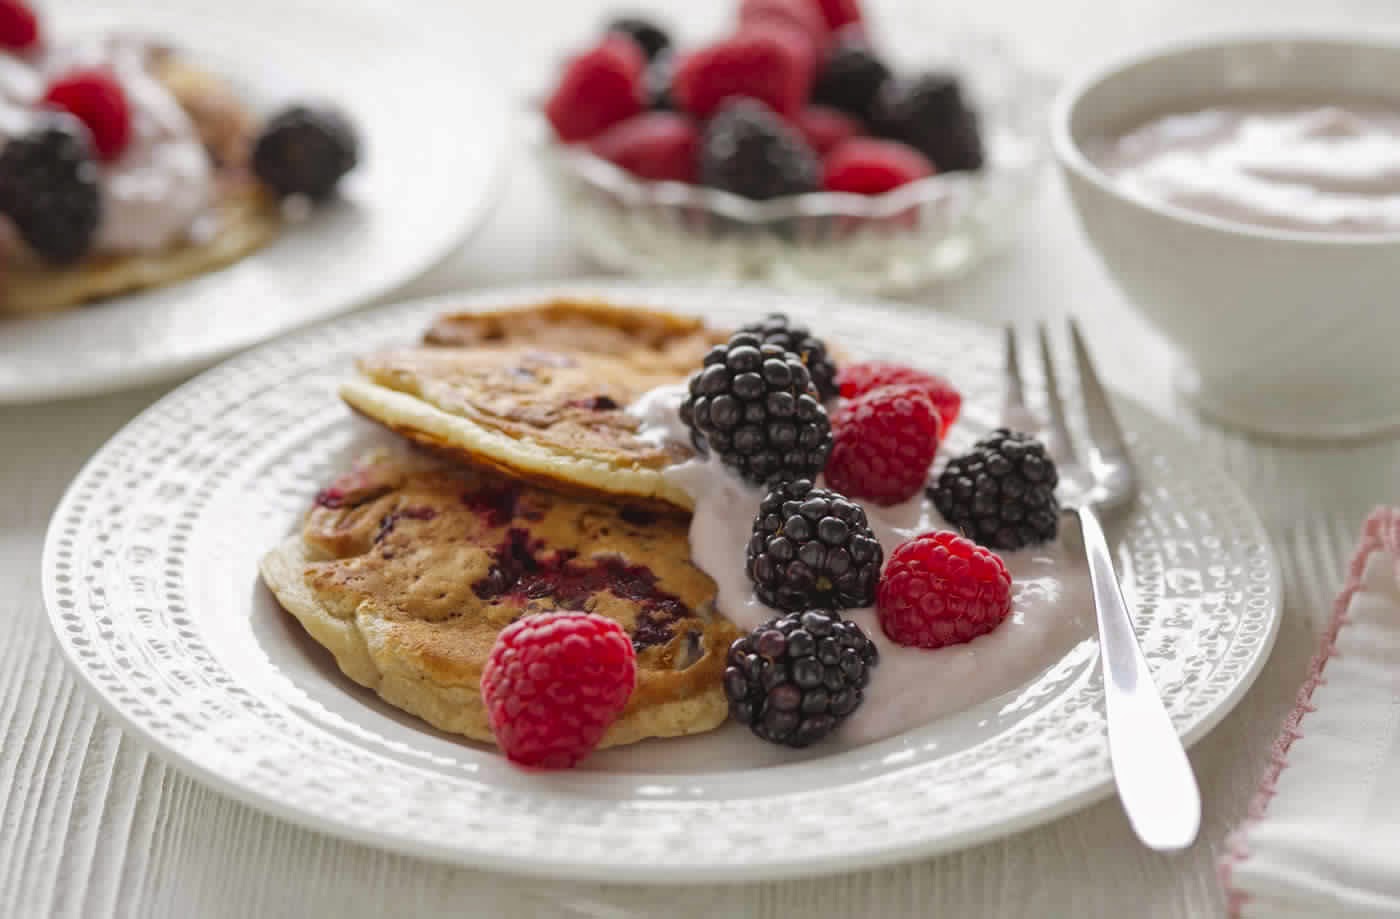 Slimming world: Chocolate Pancakes with Summer Berries